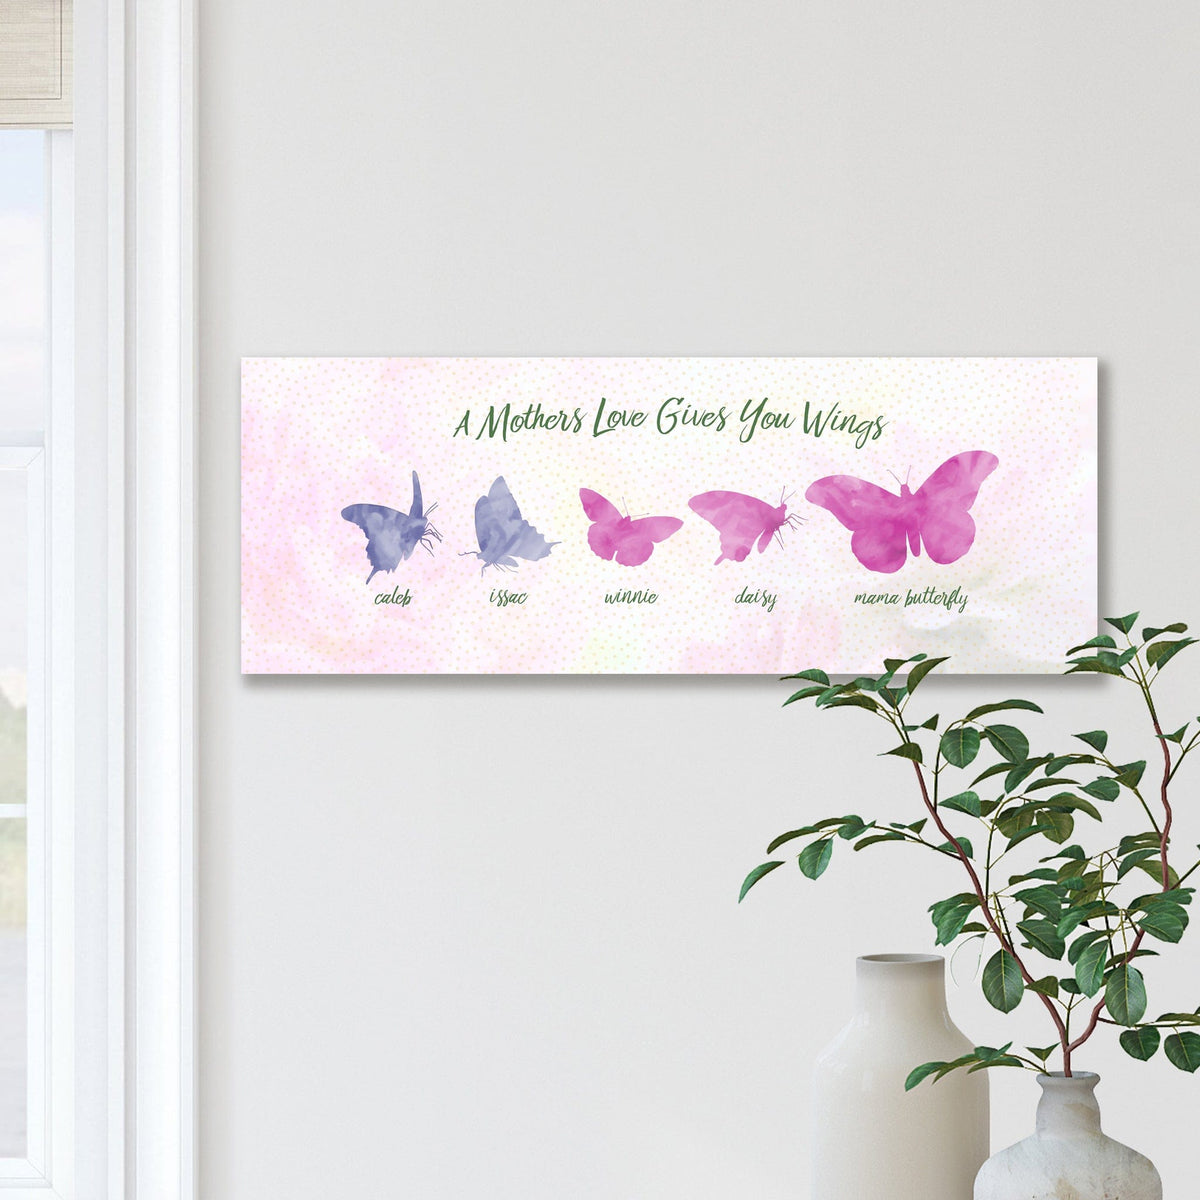 Cute gift idea for mom with the names of her kids in the art